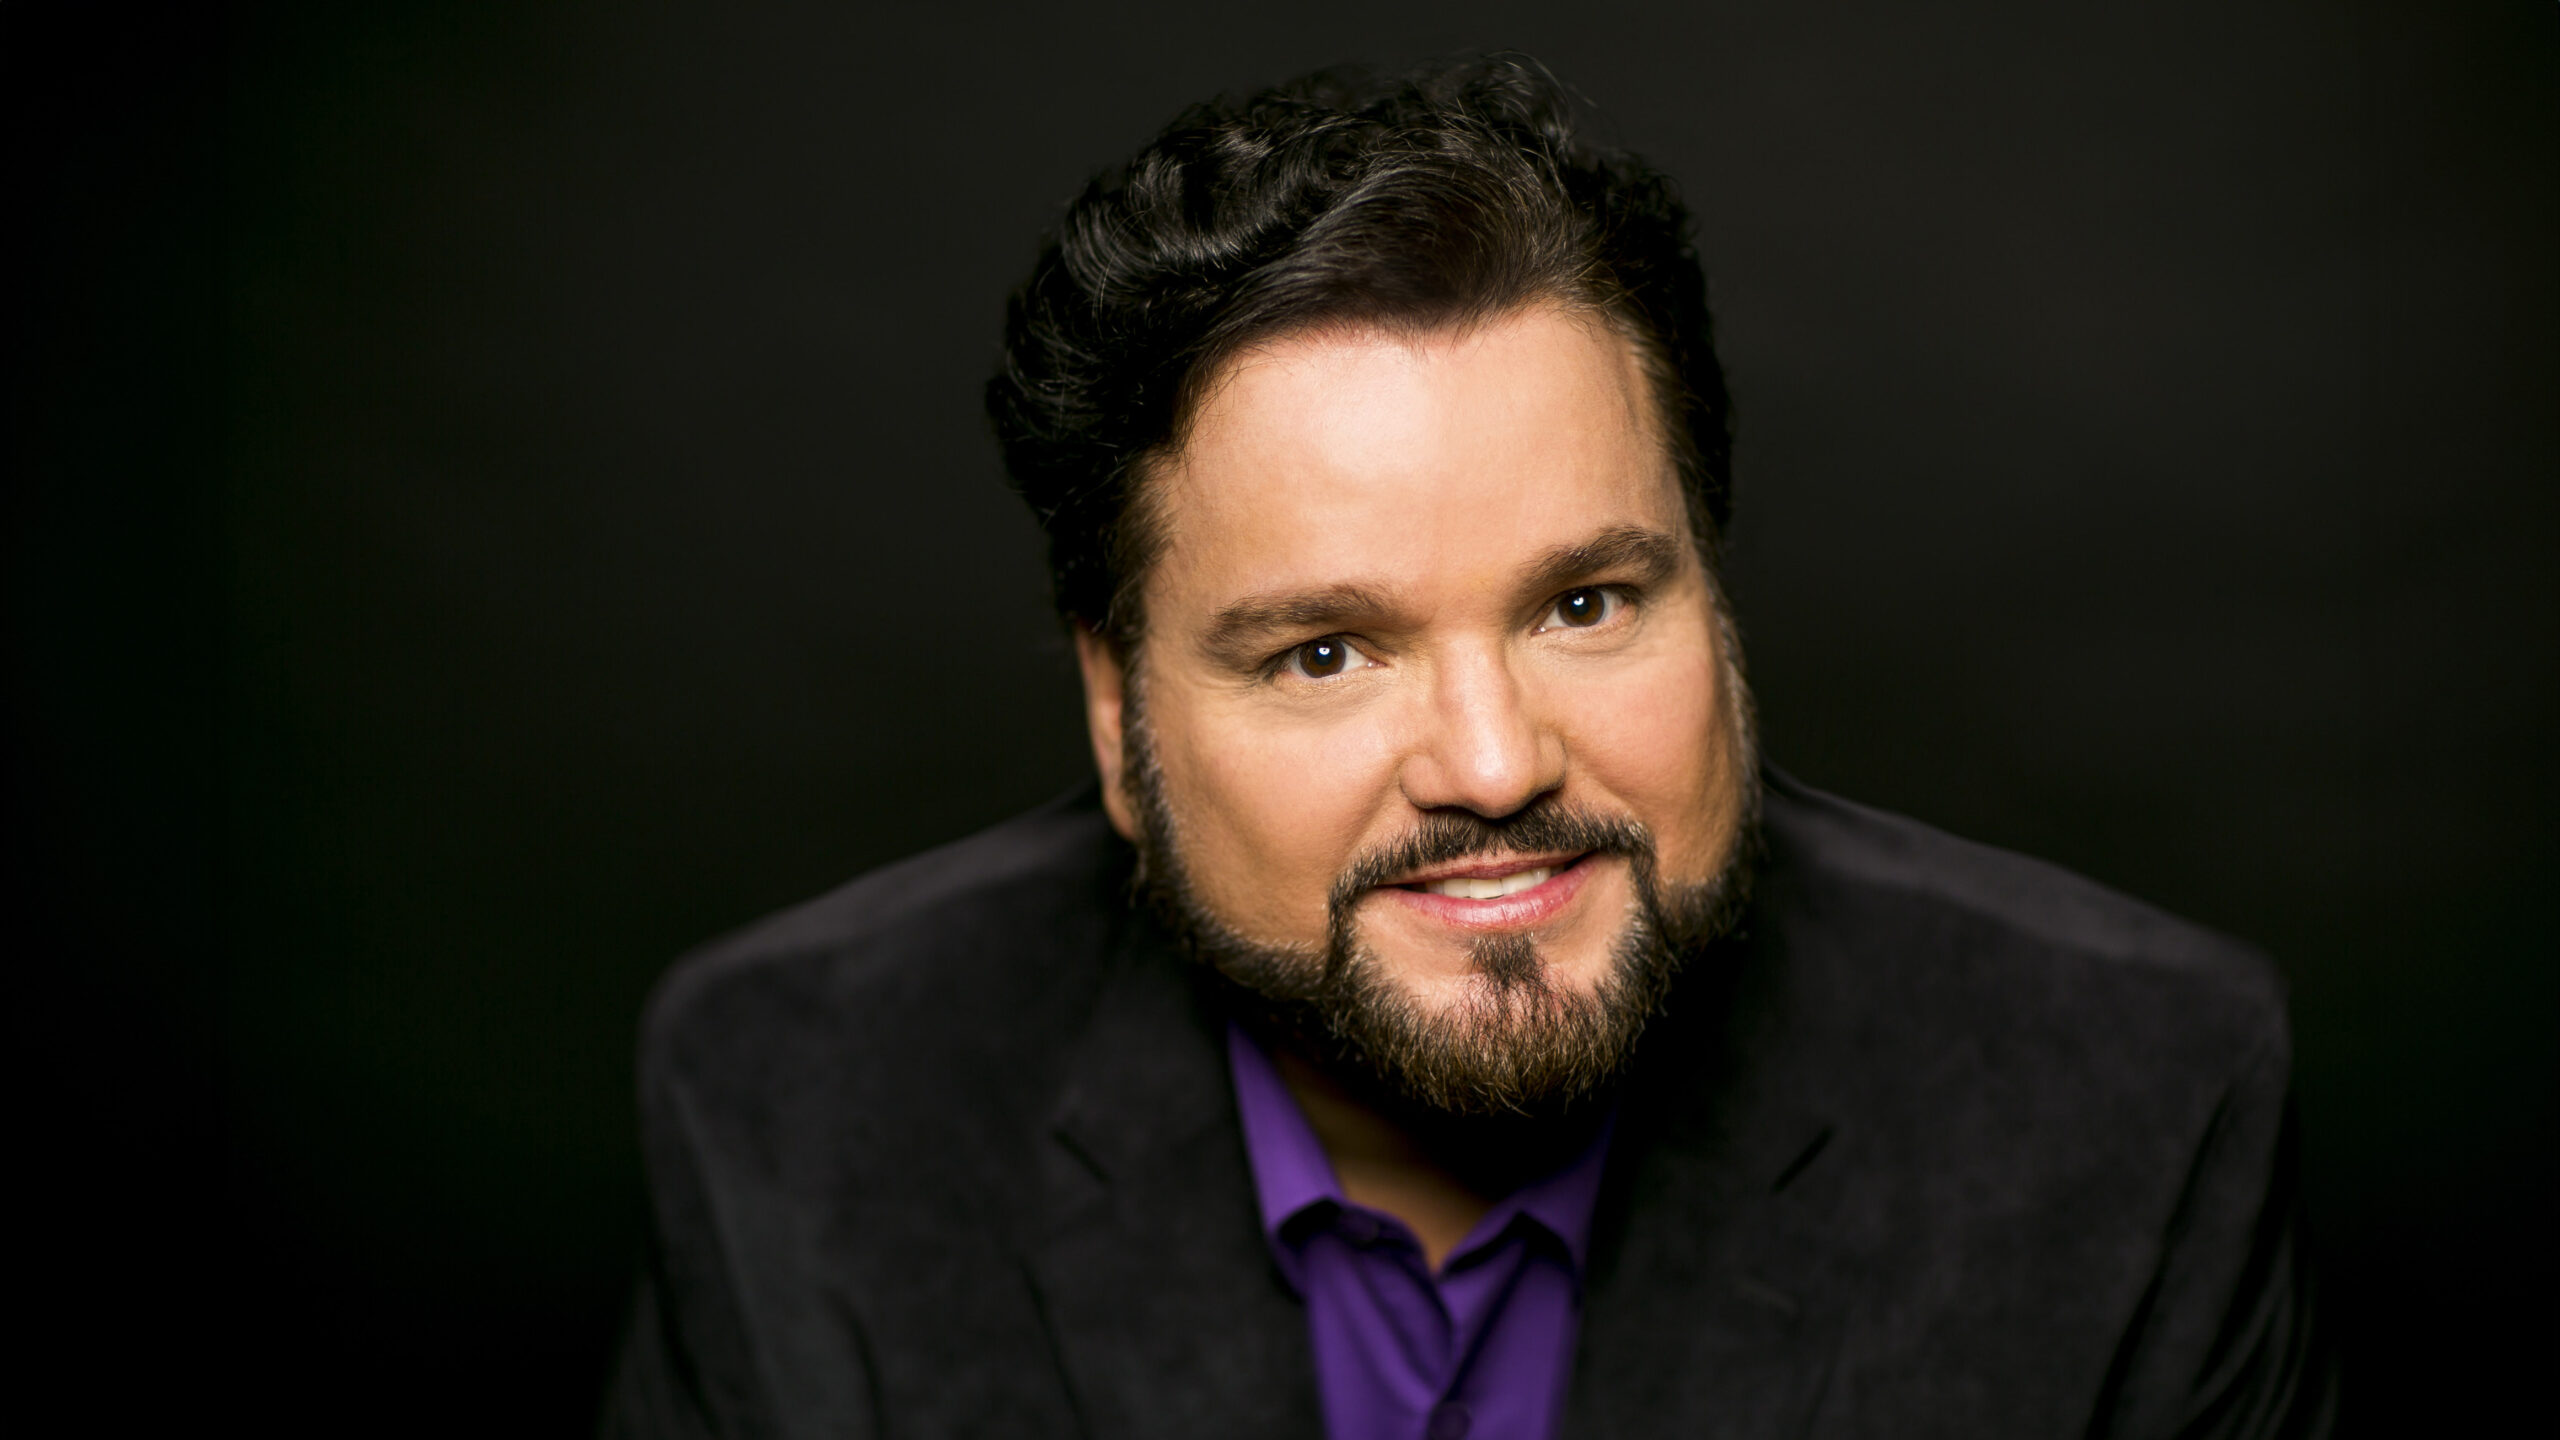 Headshot of a man with dark hair wearing a purple shirt and black suit